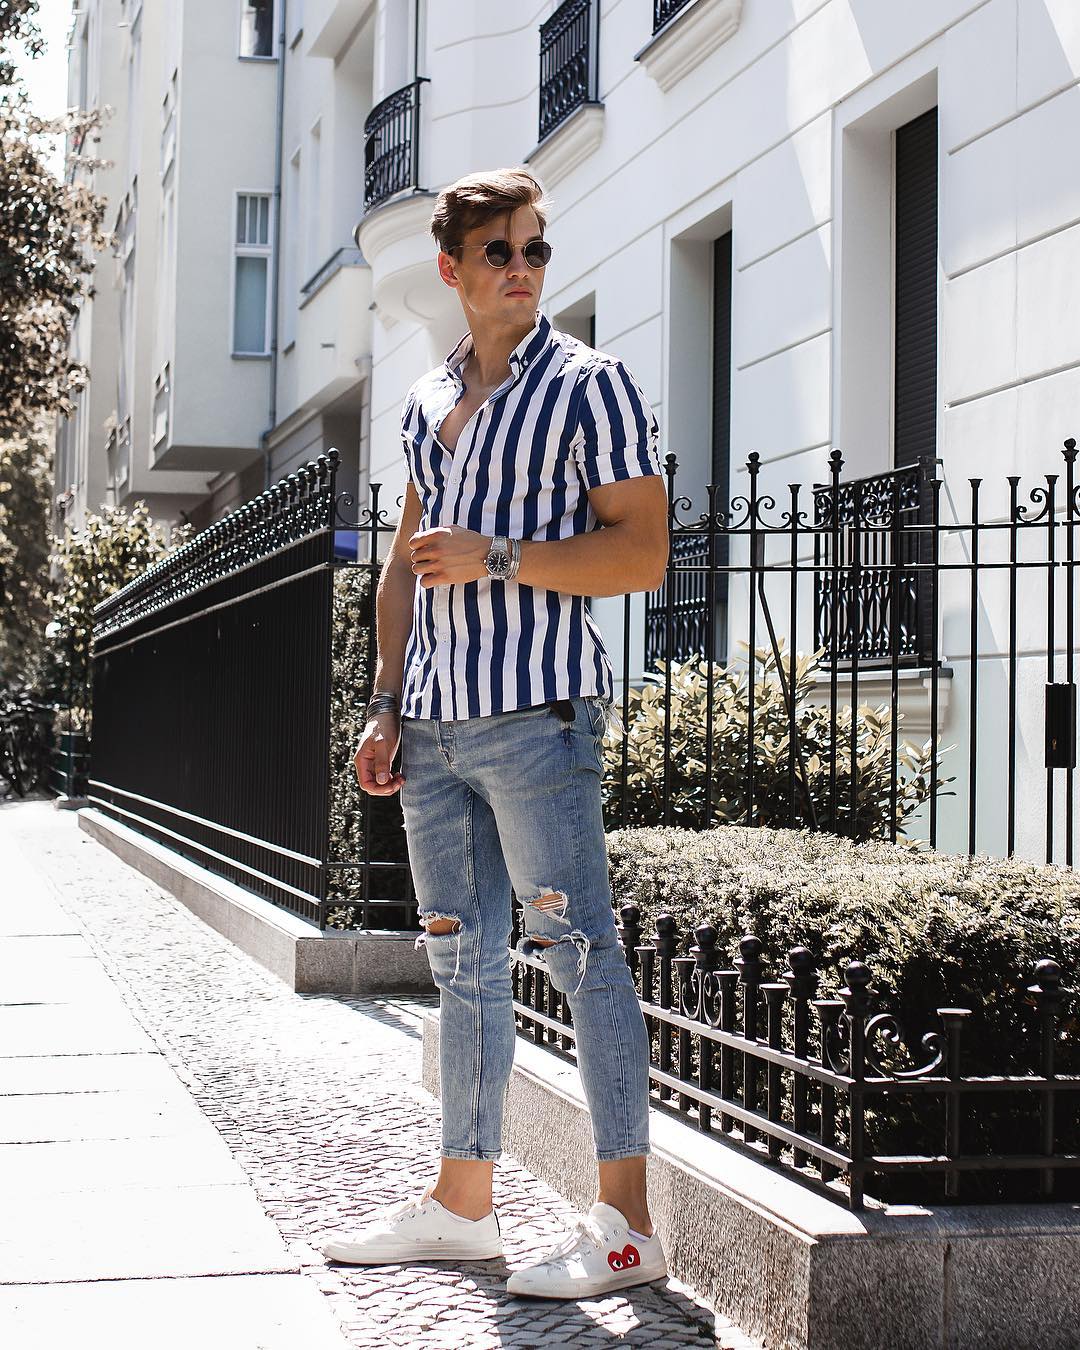 12 evergreen vertical striped outfit for men - LIFESTYLENUTS